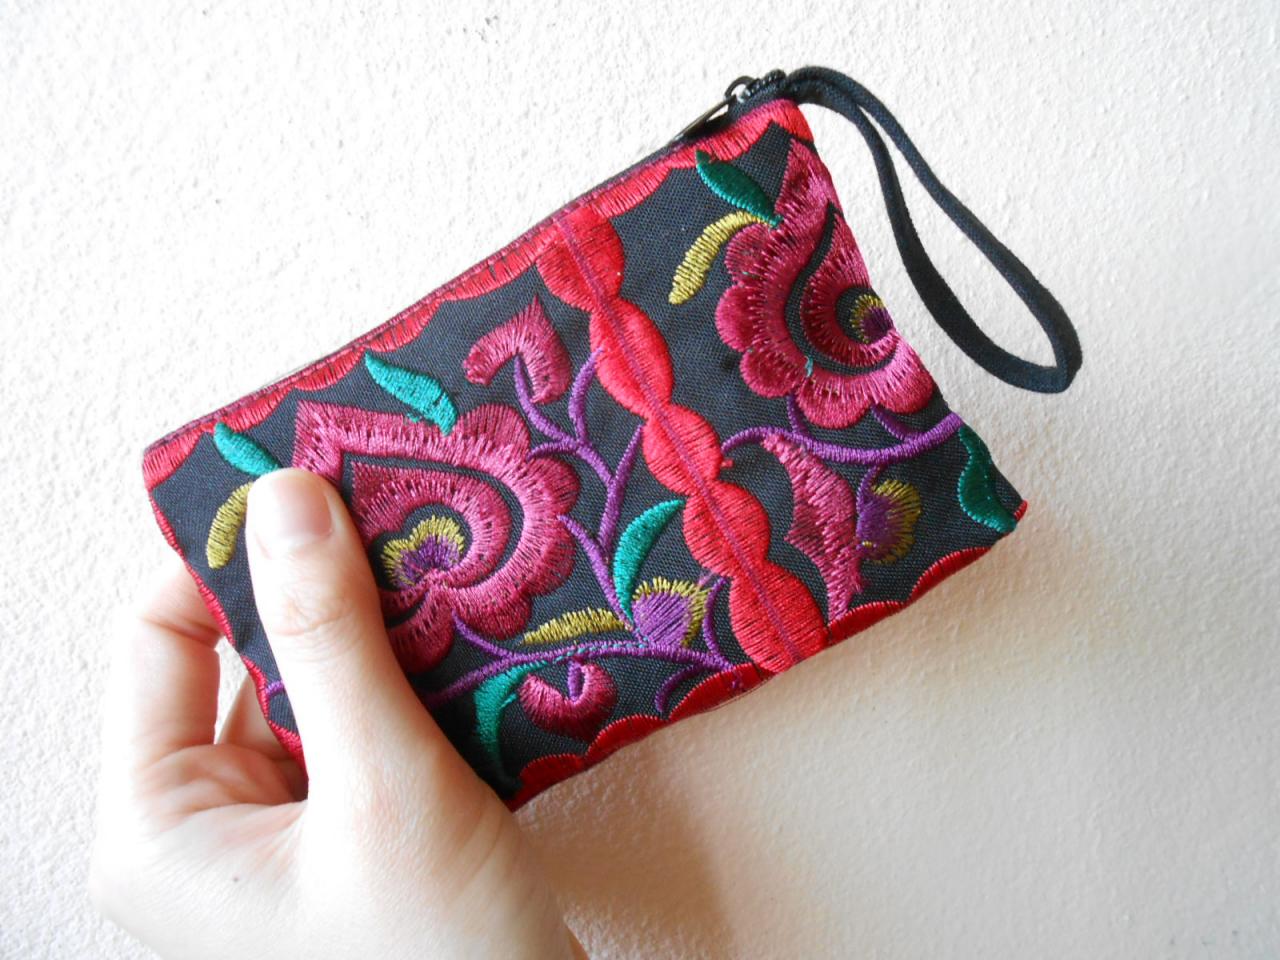 Red Black Cotton Flower Colorful Purse Embroidery Chinese Hmong Hilltribe Thailand. (kp1051-rebk)